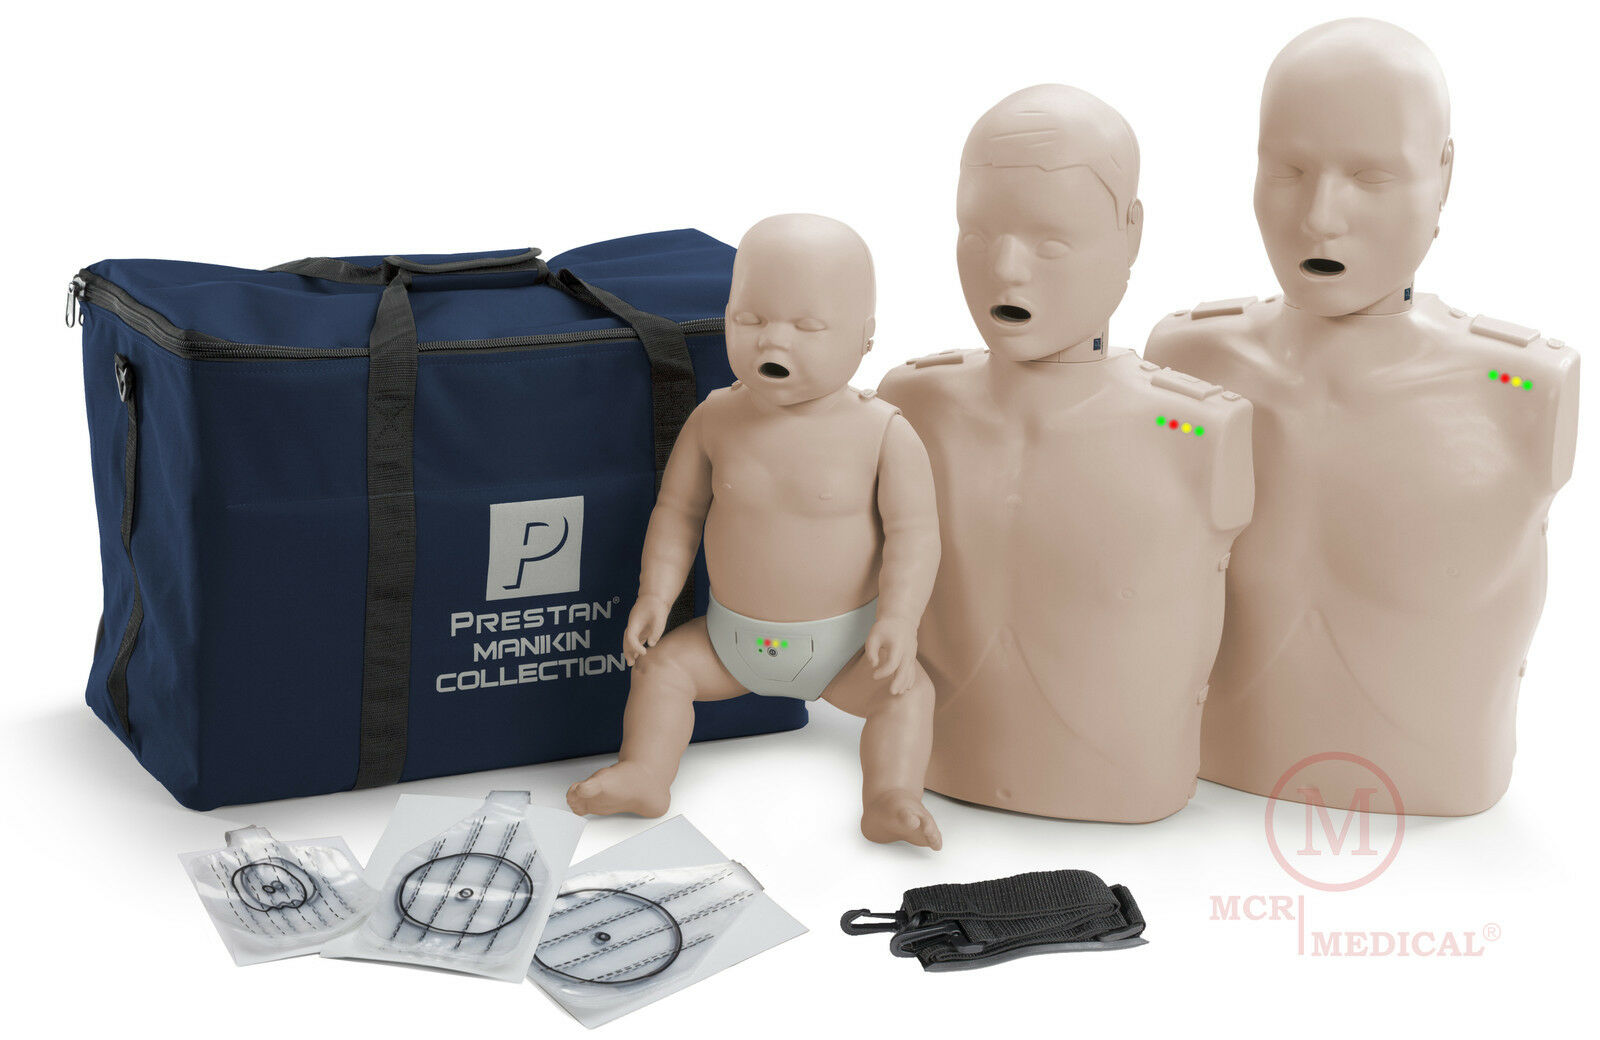 Prestan Collection Cpr Manikins With Feedback (adult-child-infant) Pp-fm-300m-ms